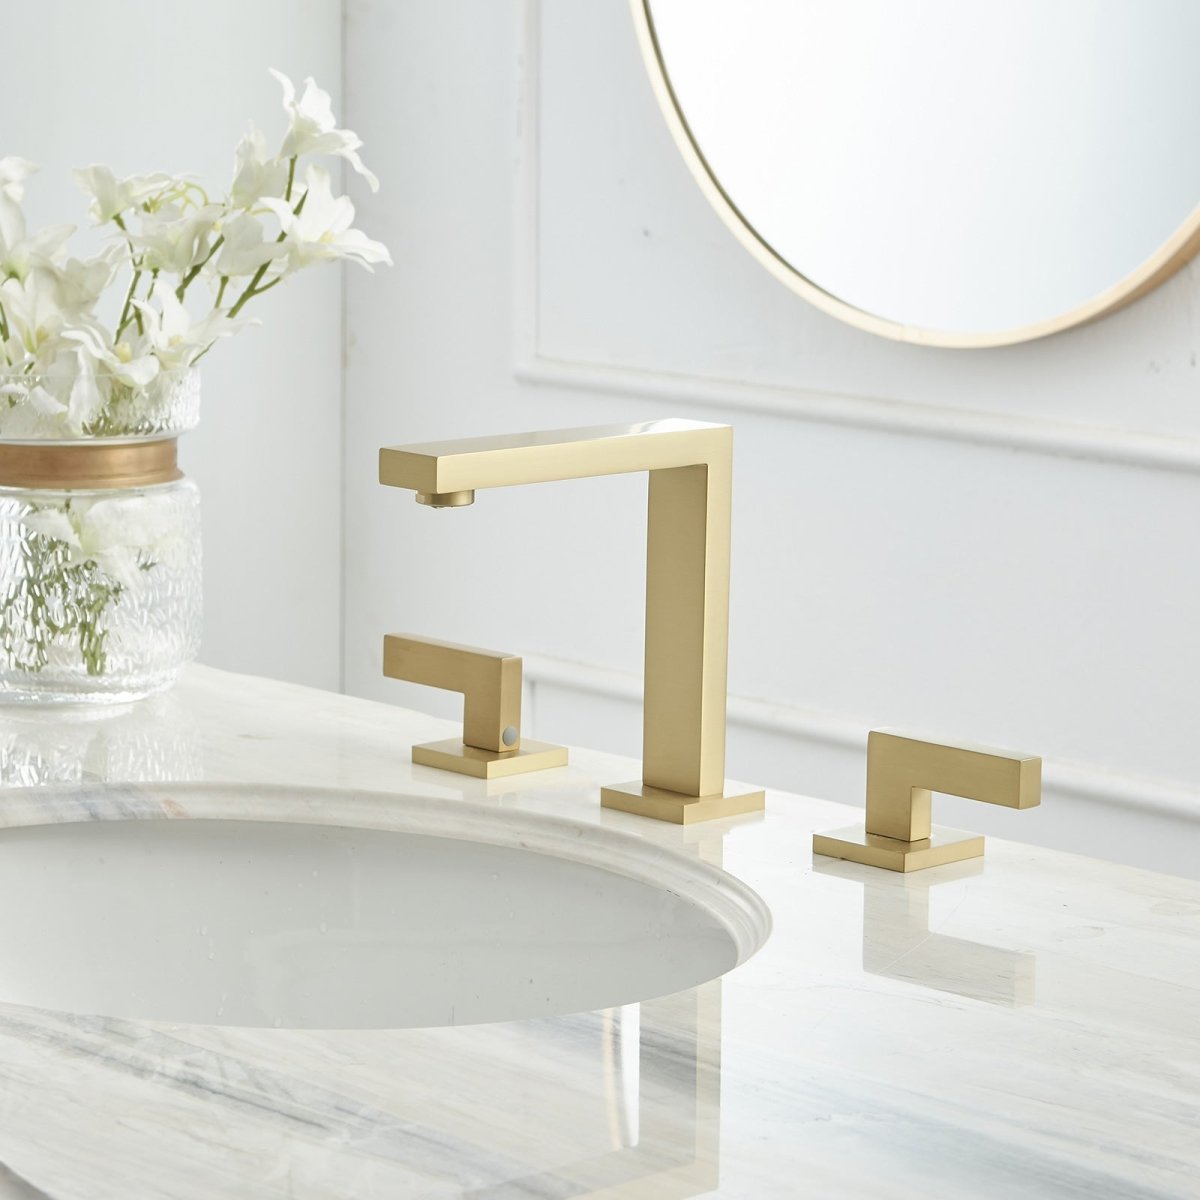 8 in Double Handle Bathroom Faucet Brushed Gold - buyfaucet.com